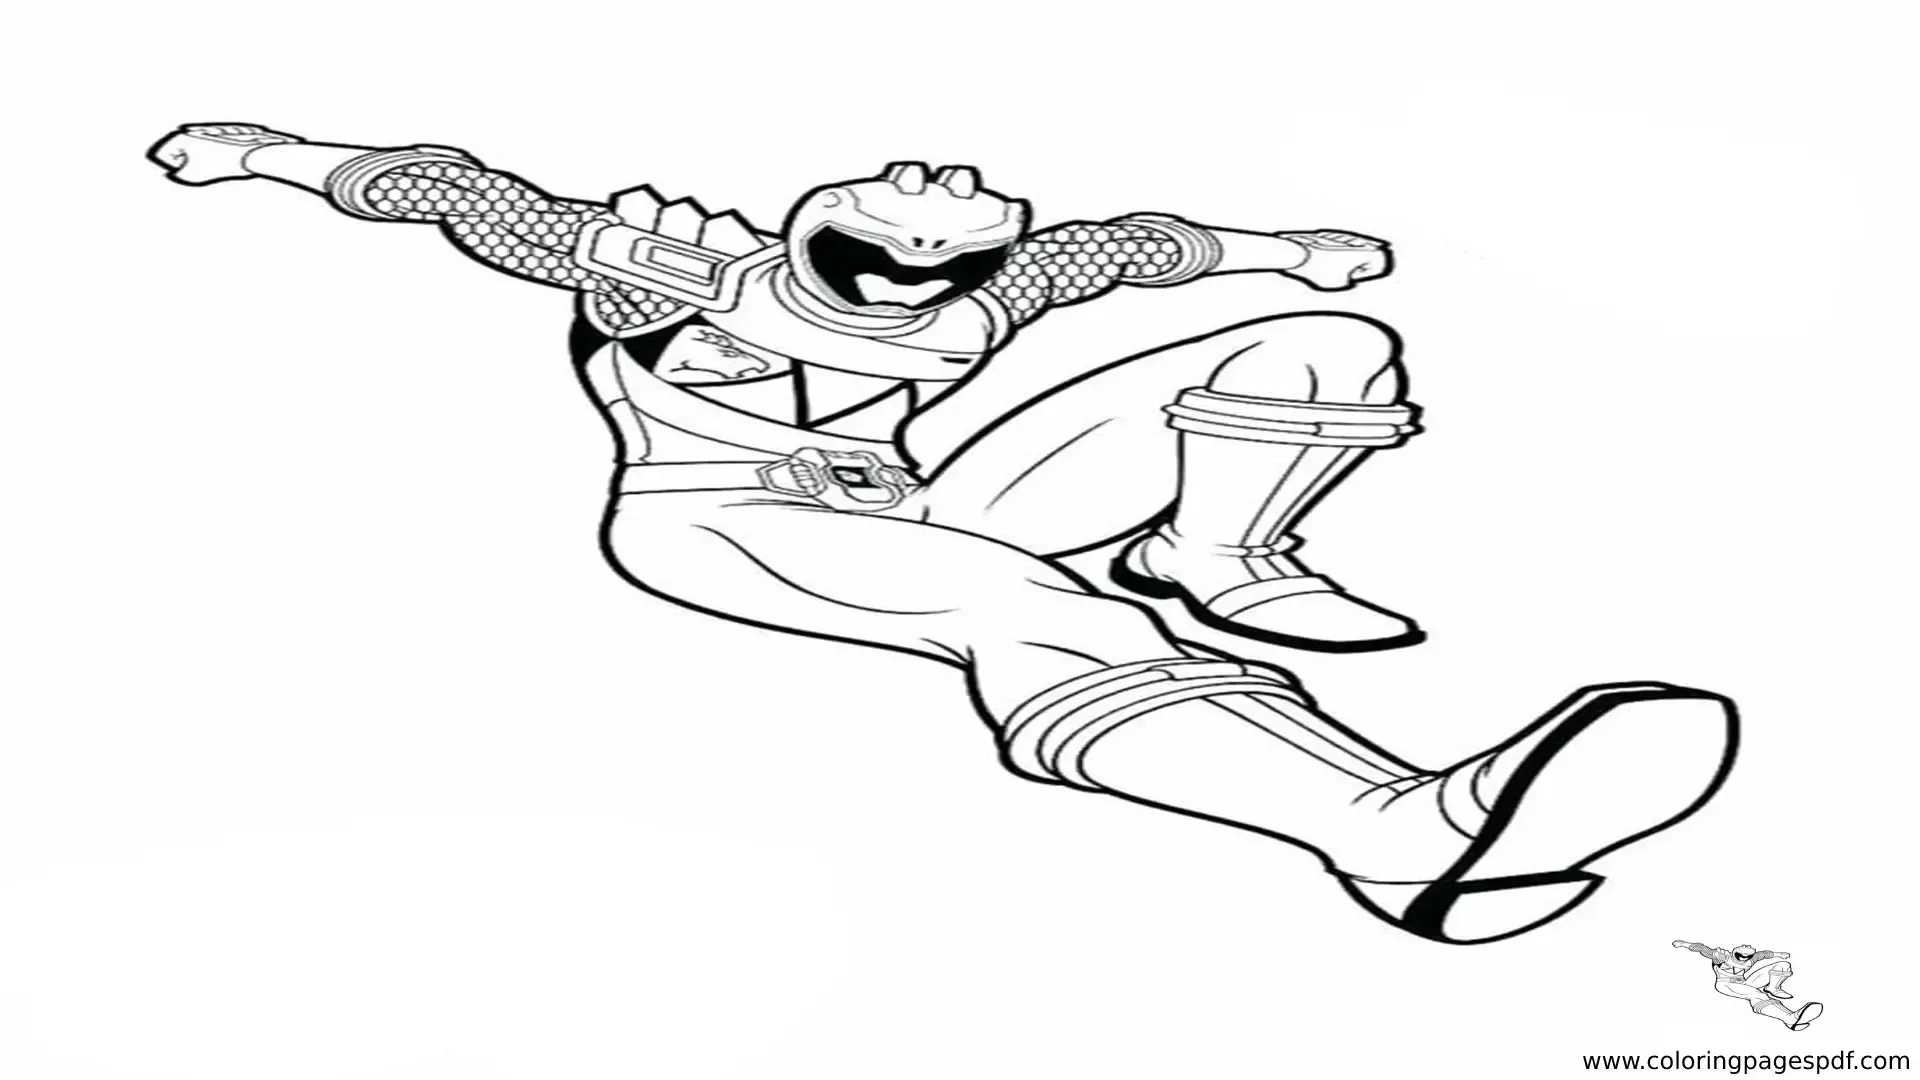 Blue Power Ranger Coloring Pages